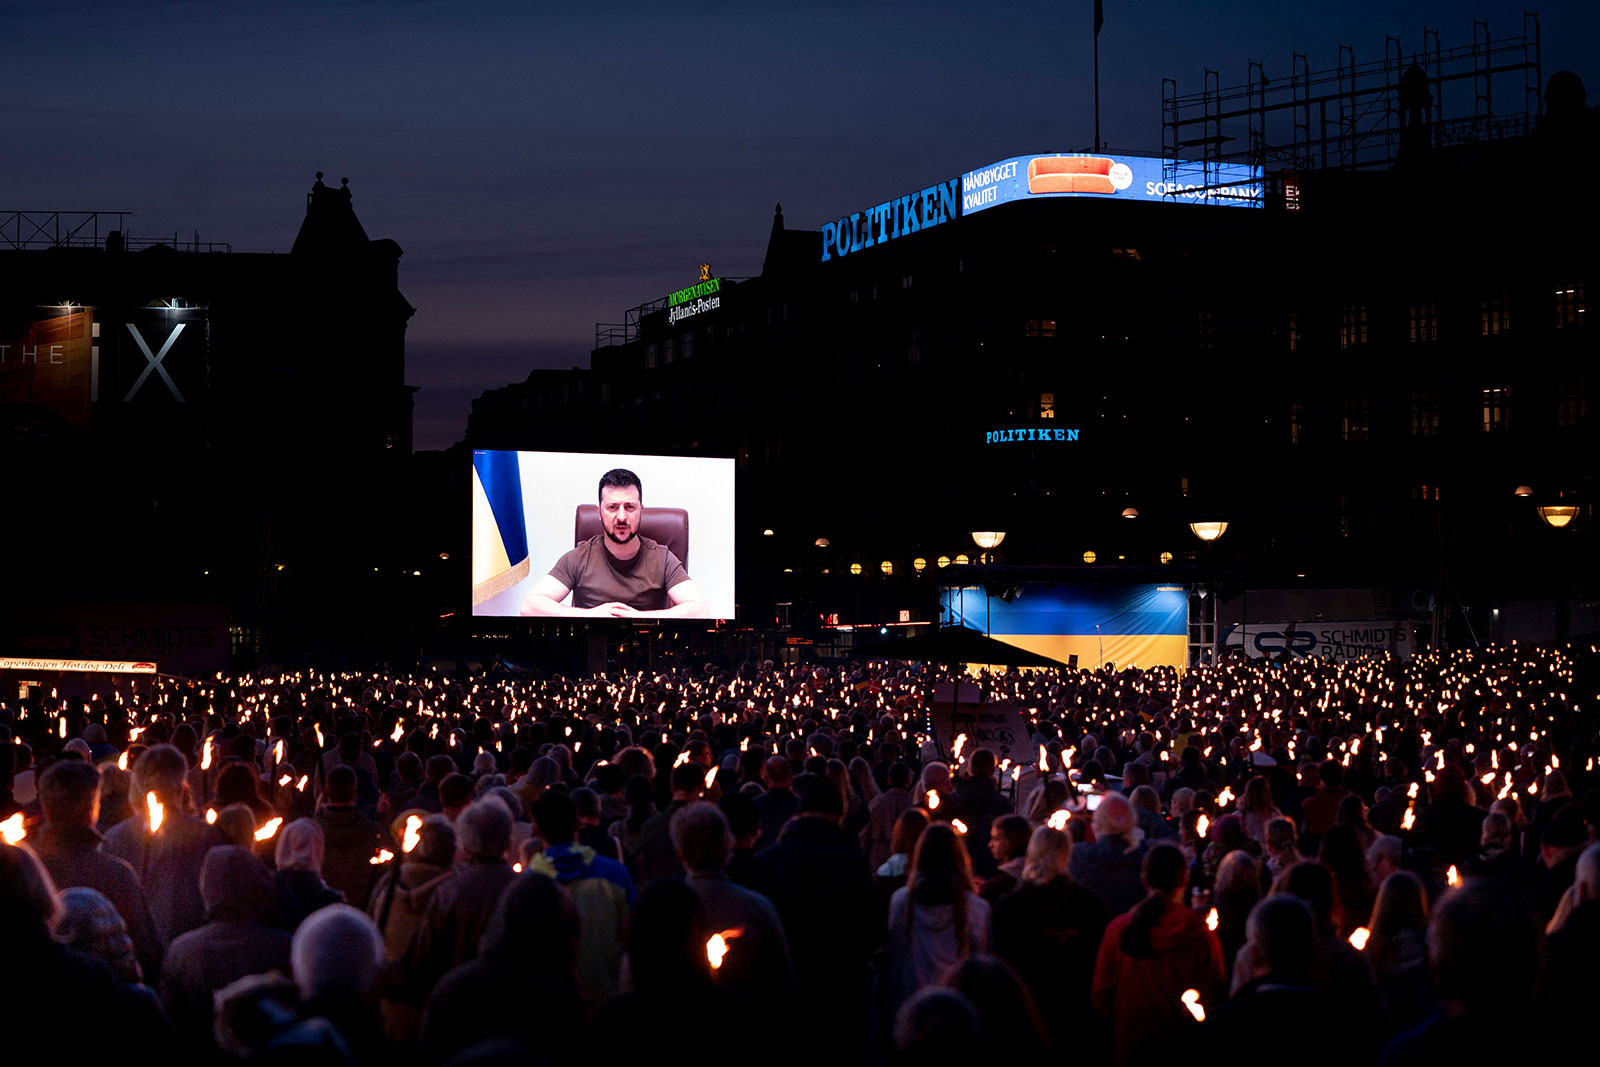 Ukrainian President Volodymyr Zelensky appears on screen to address people at the City Hall Square in Copenhagen, Denmark, on May, 4. 